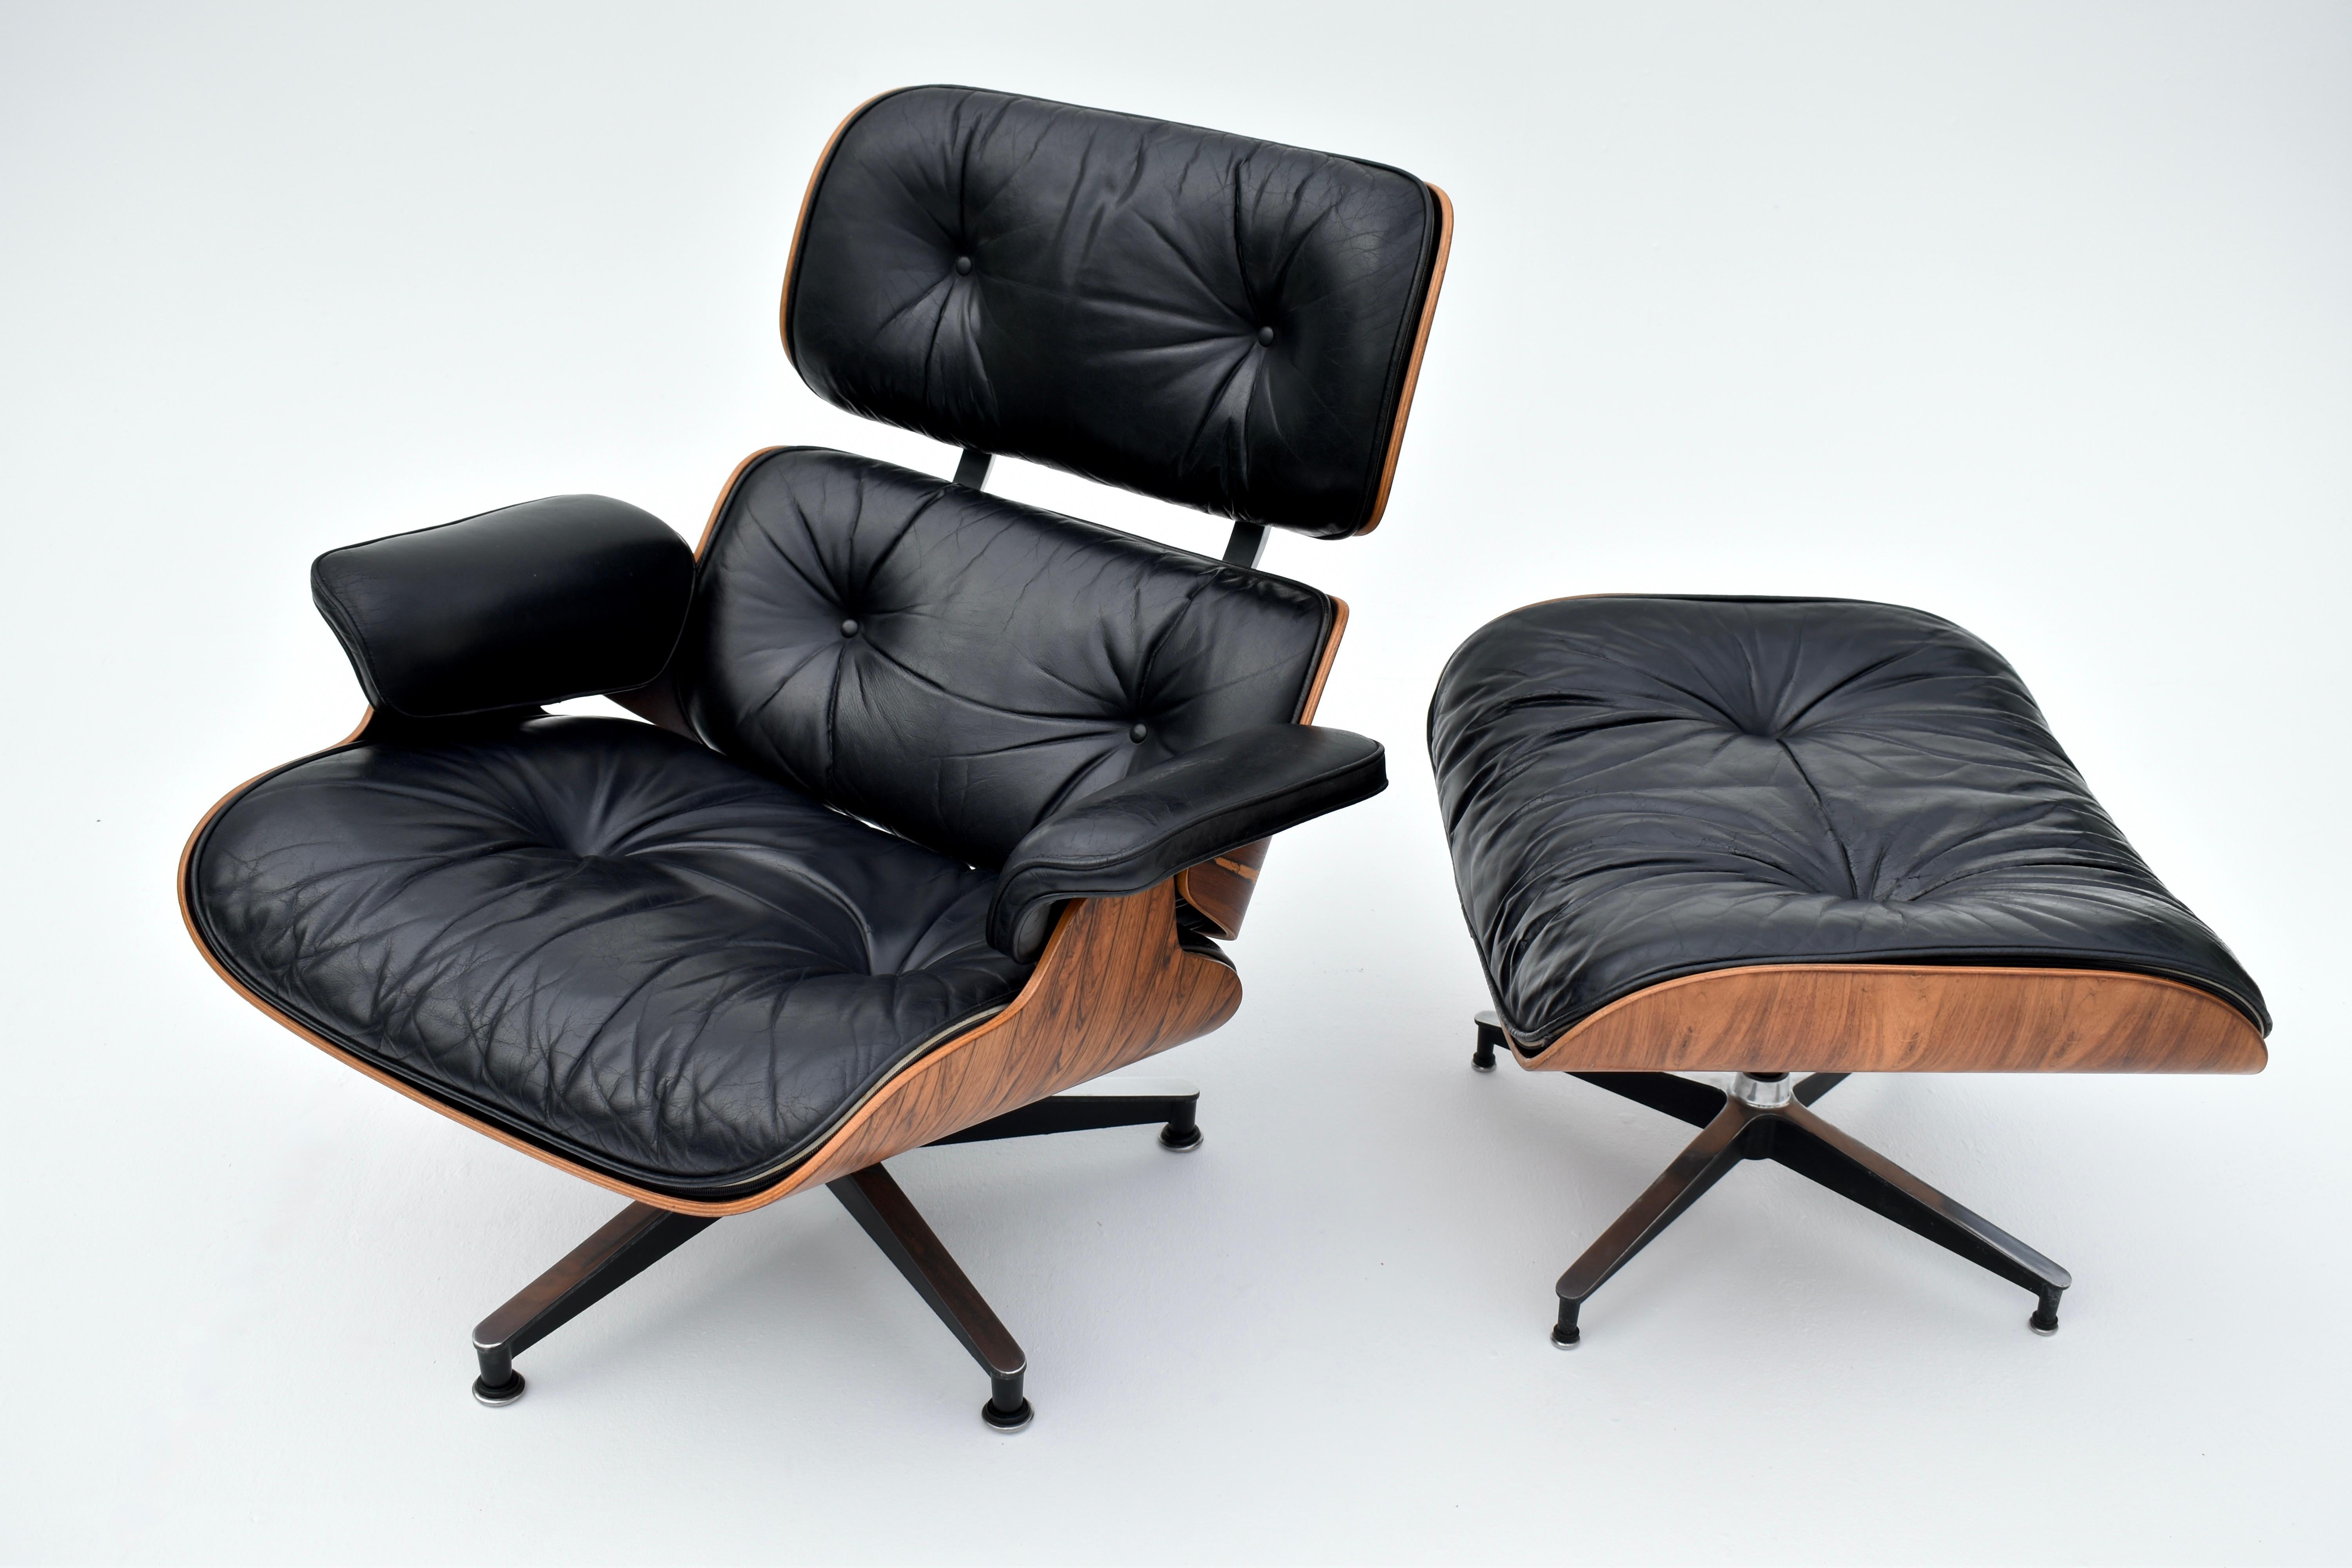 Leather Original 1960's Production Eames Lounge Chair & Ottoman For Herman Miller For Sale